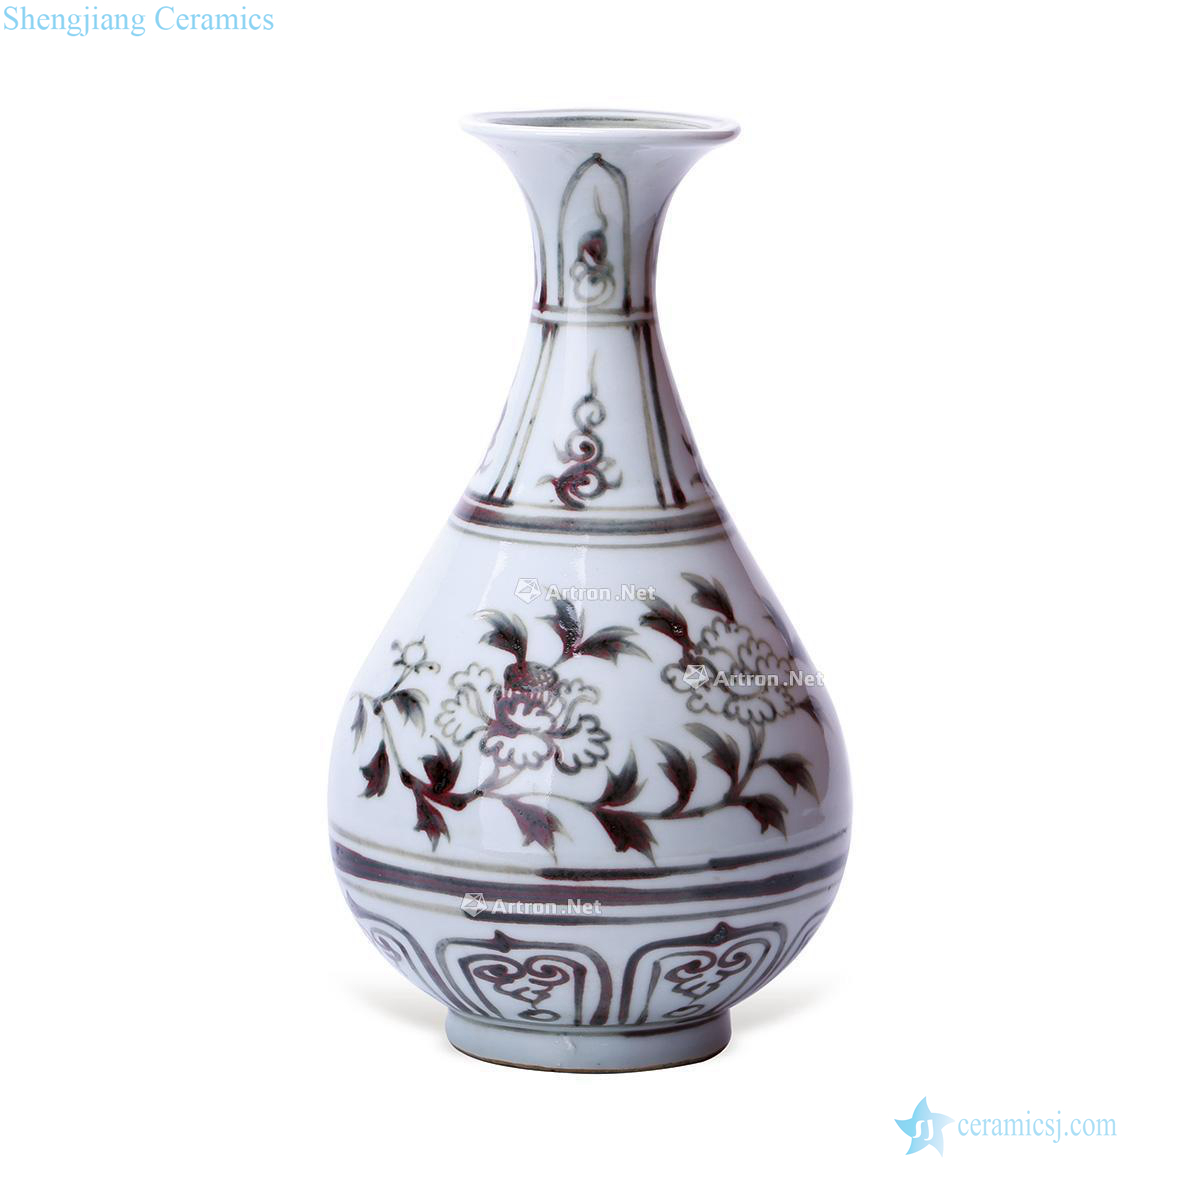 The yuan dynasty Figure okho spring bottle youligong folding branches of flowers